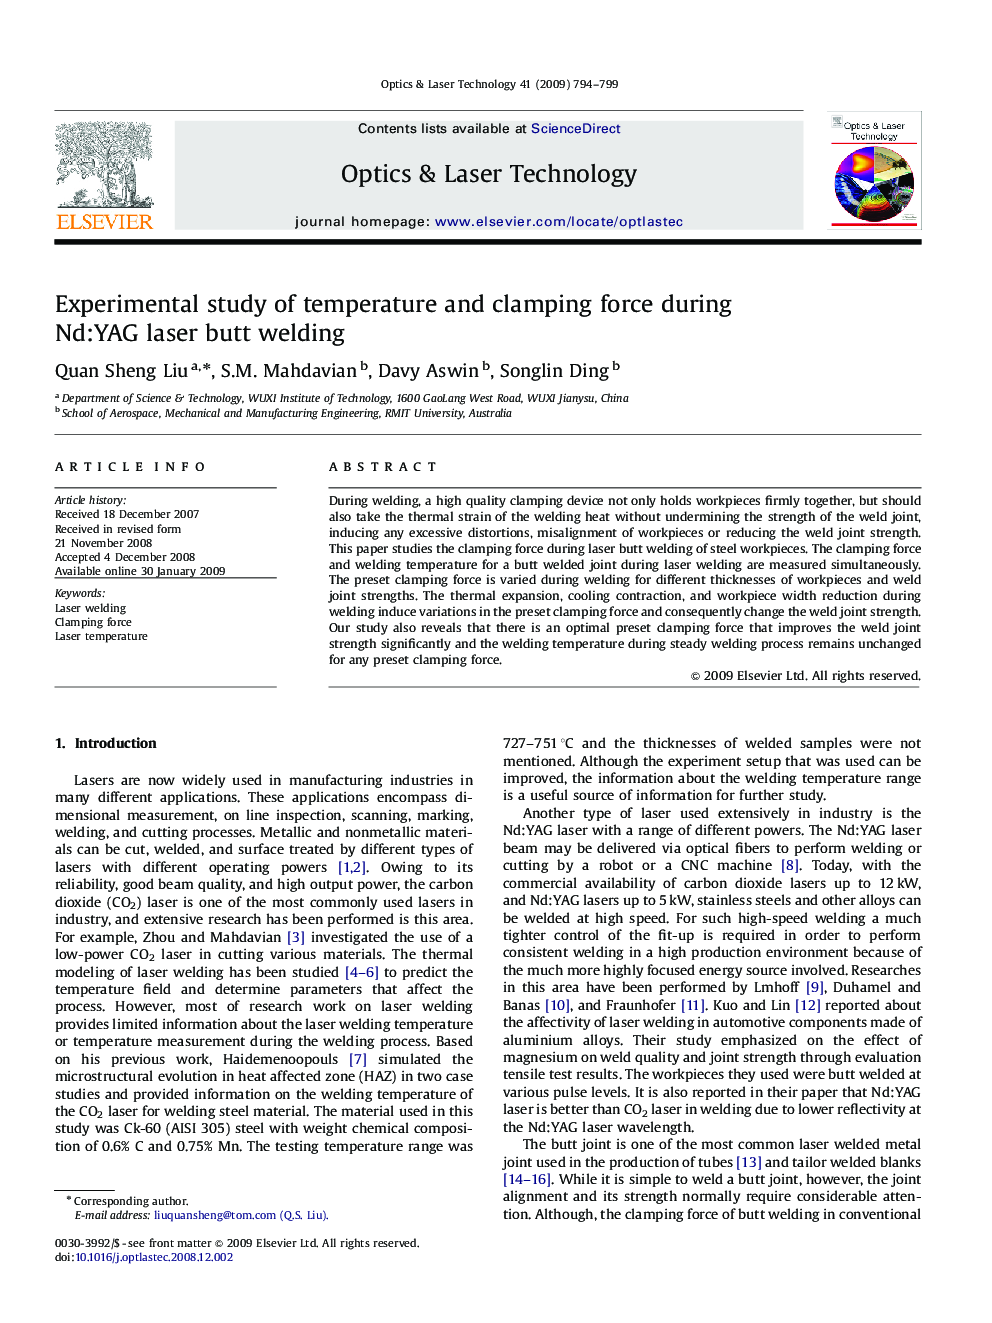 Experimental study of temperature and clamping force during Nd:YAG laser butt welding